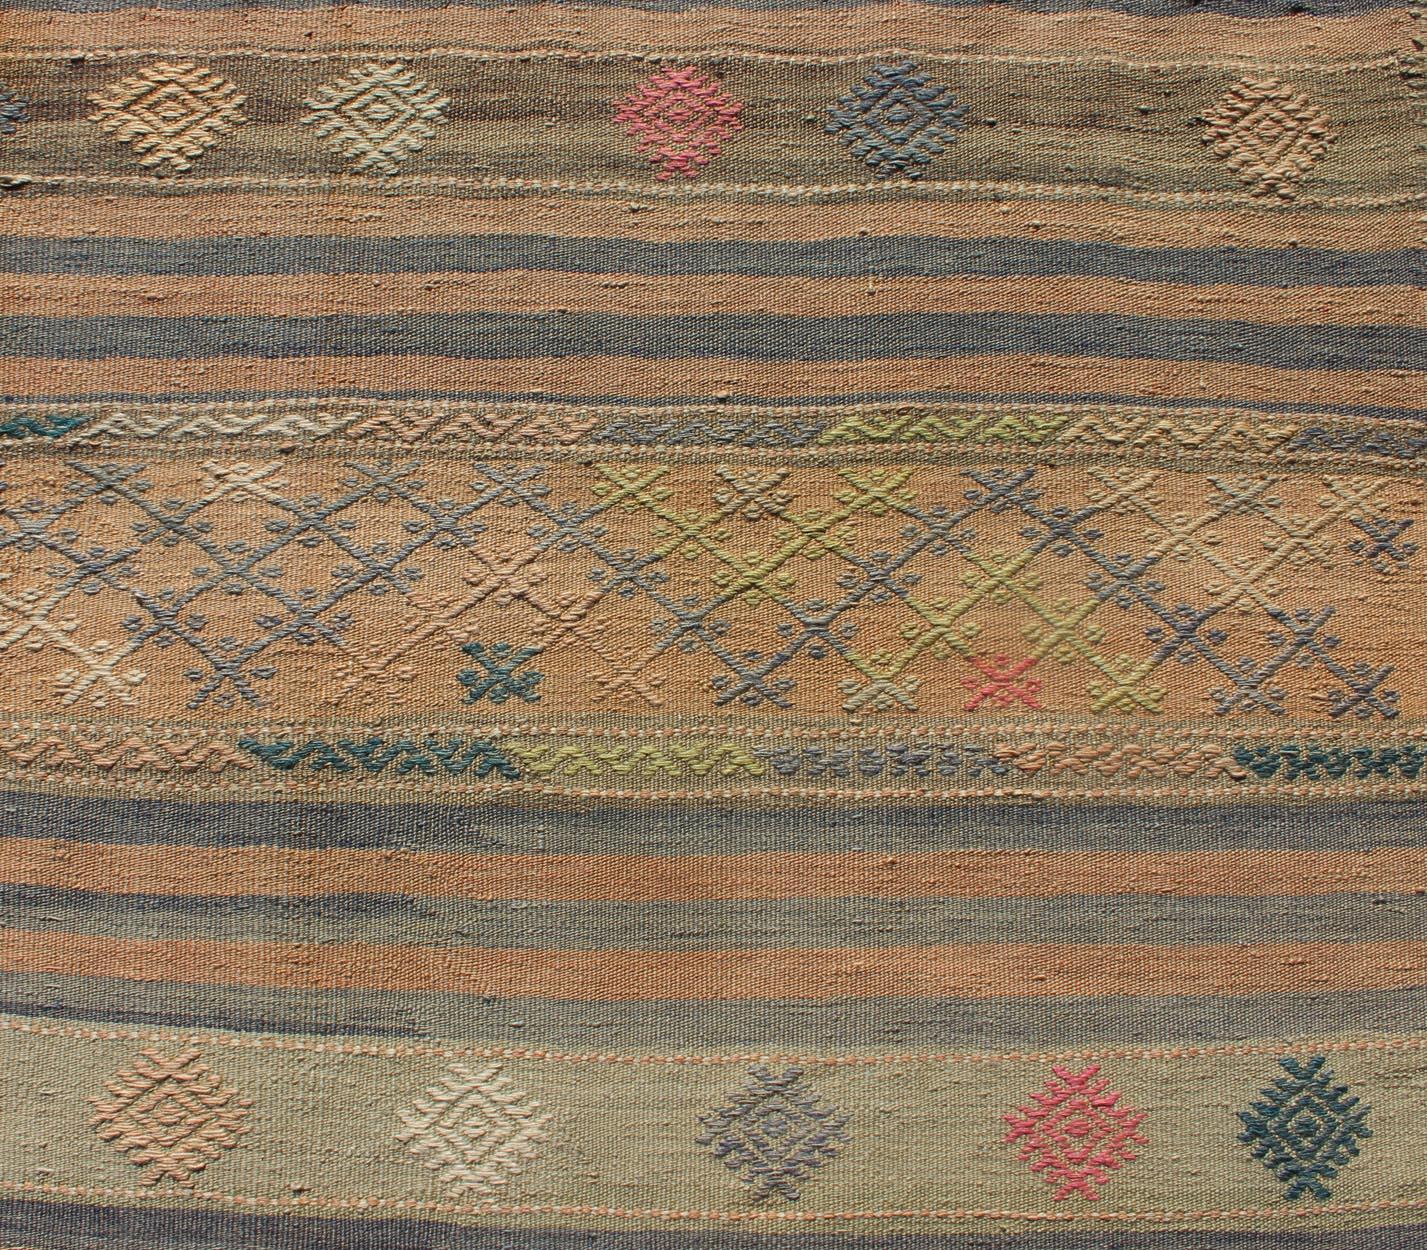 Wool Vintage Turkish Kilim Runner with Geometric Design and Colorful Stripes For Sale